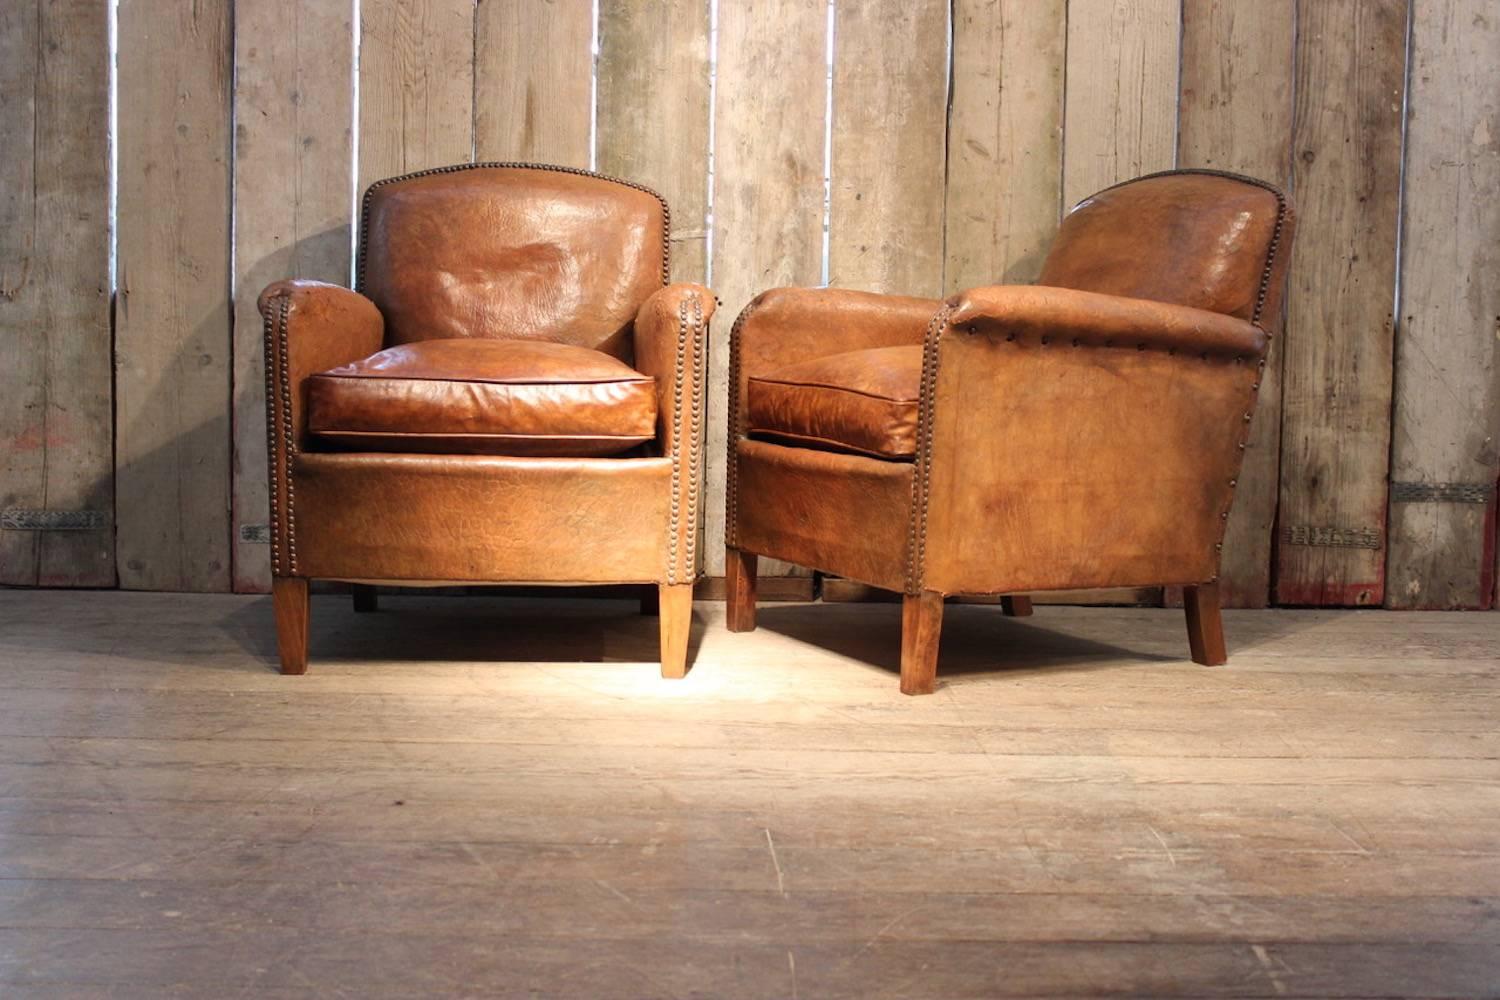 A good pair of early 20th century French leather club armchairs with original tan leather and close-nailing, the seat cushions re-covered, with square tapering legs.